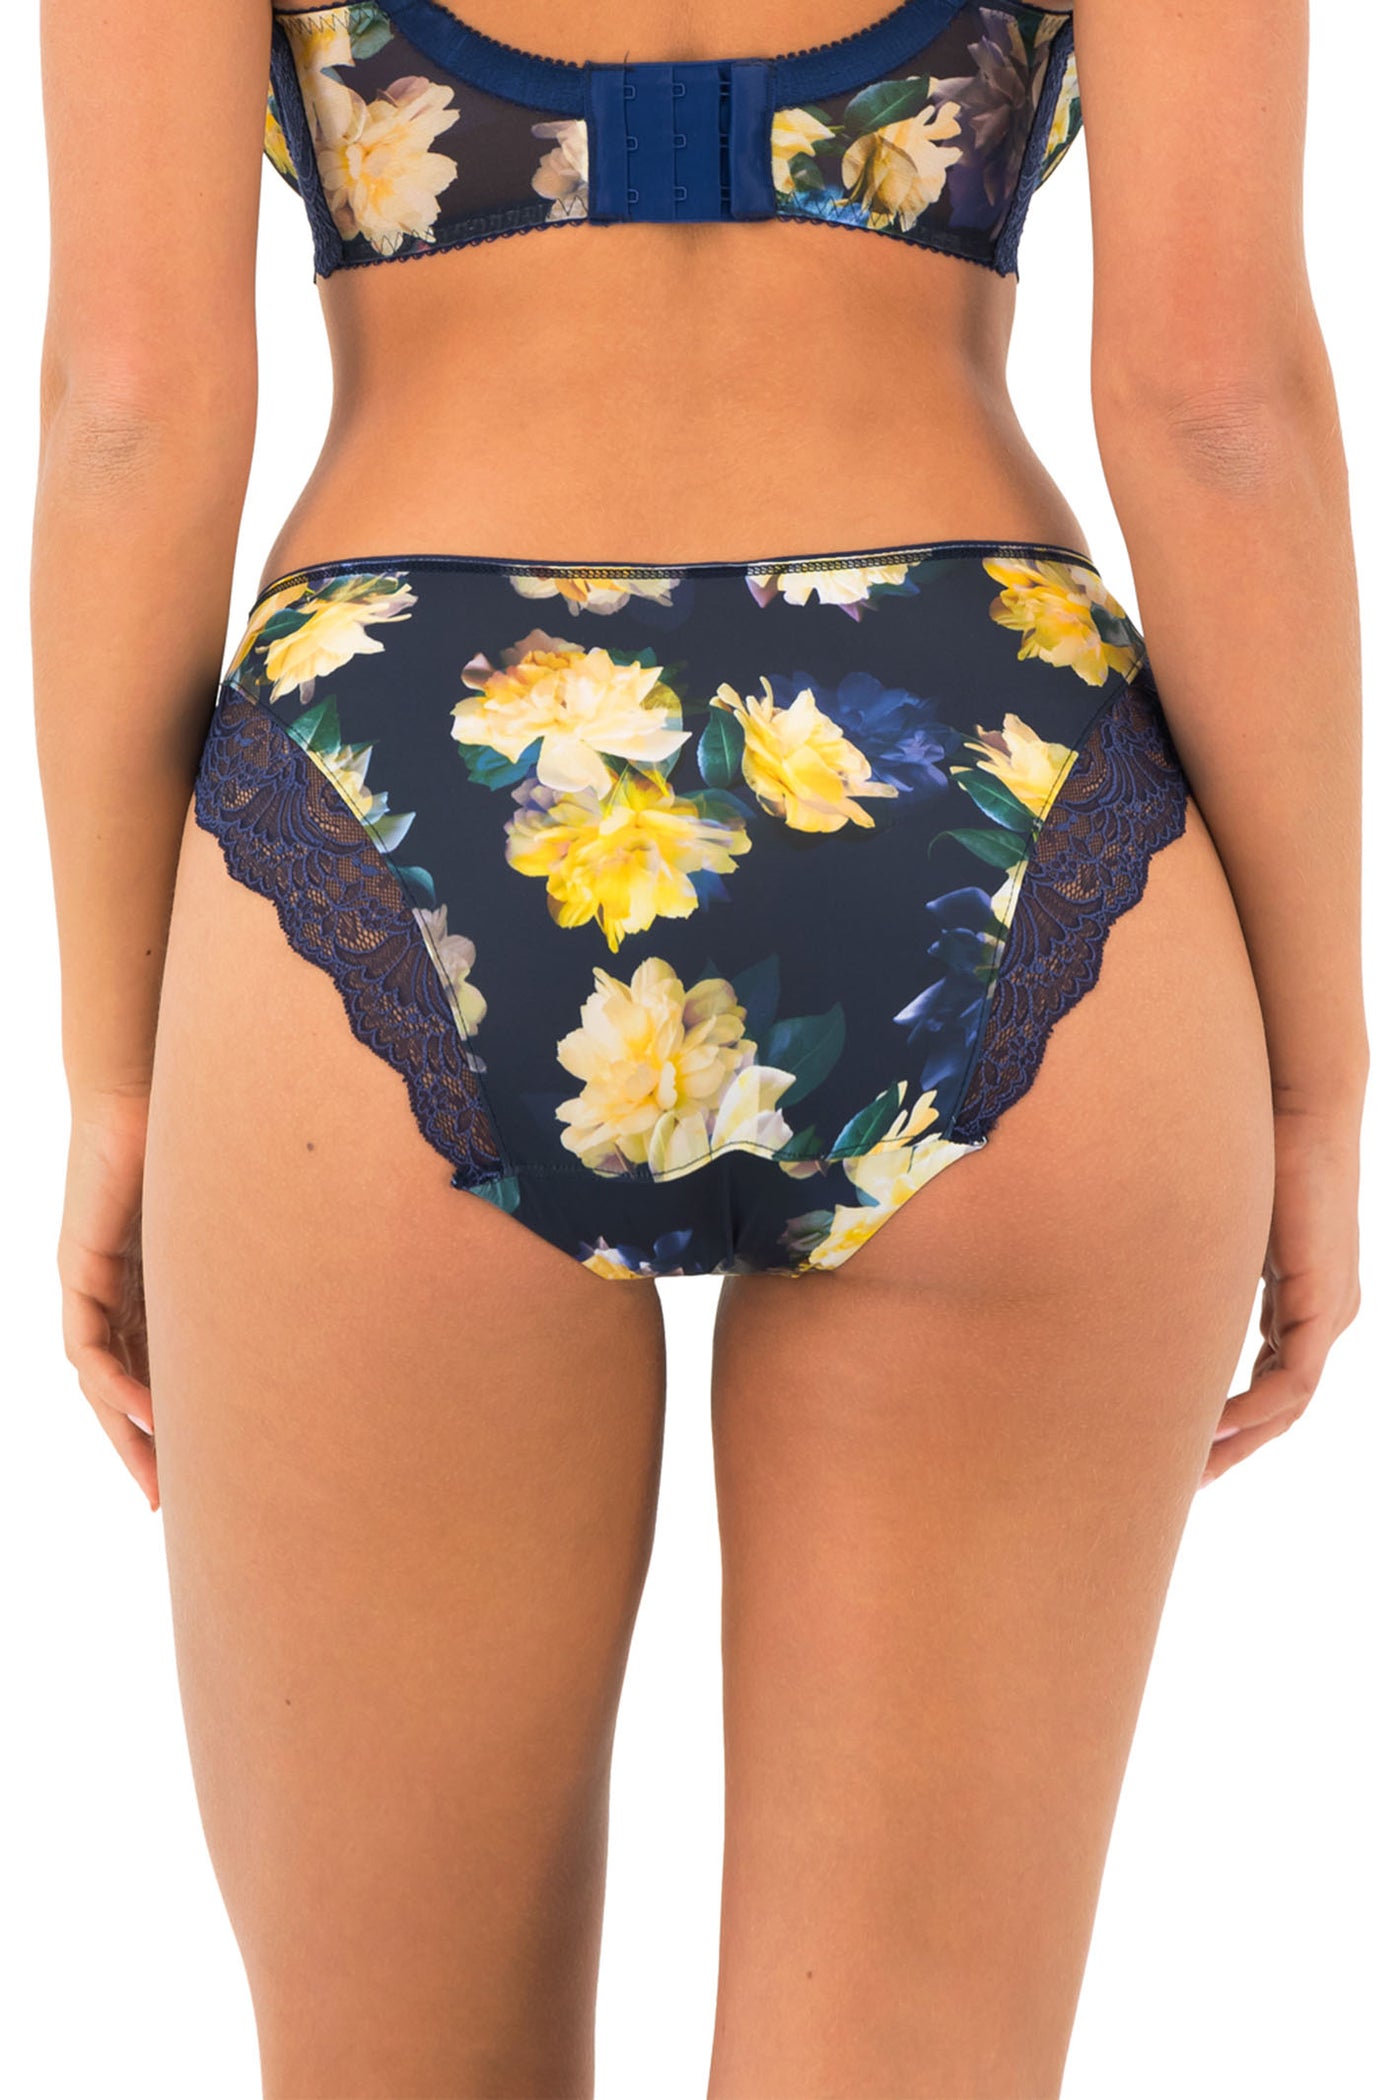 Fantasie FL101550NAY Lucia Navy Floral Full Brief - Rouge Boutique Inverness